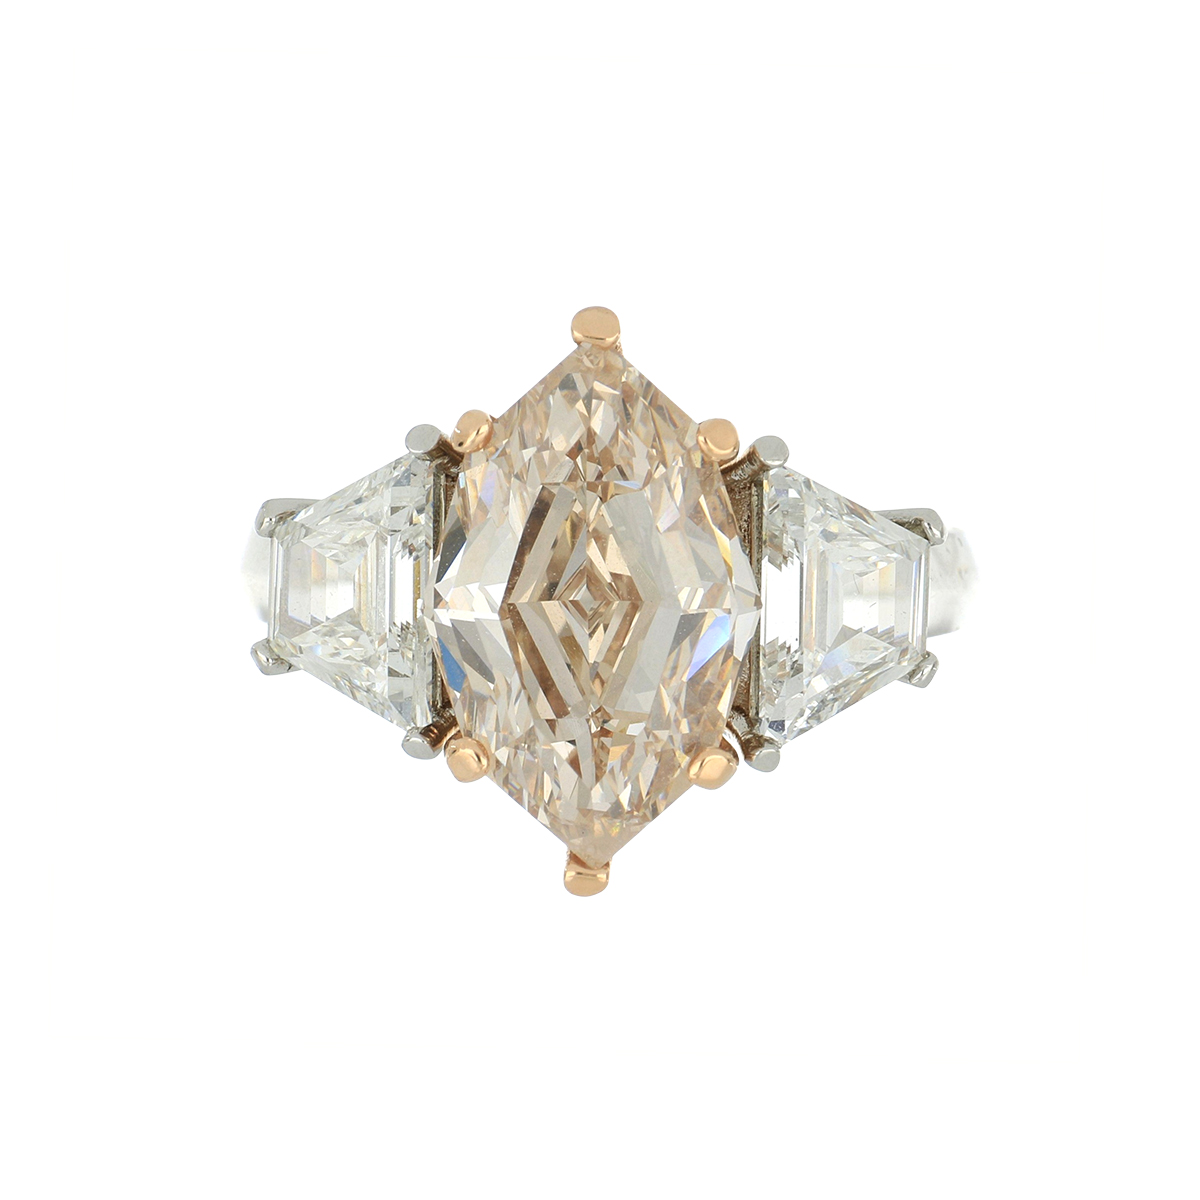 An estate three-stone engagement ring with a rose gold diamond from Tenenbaum Jewelers in Houston, TX.